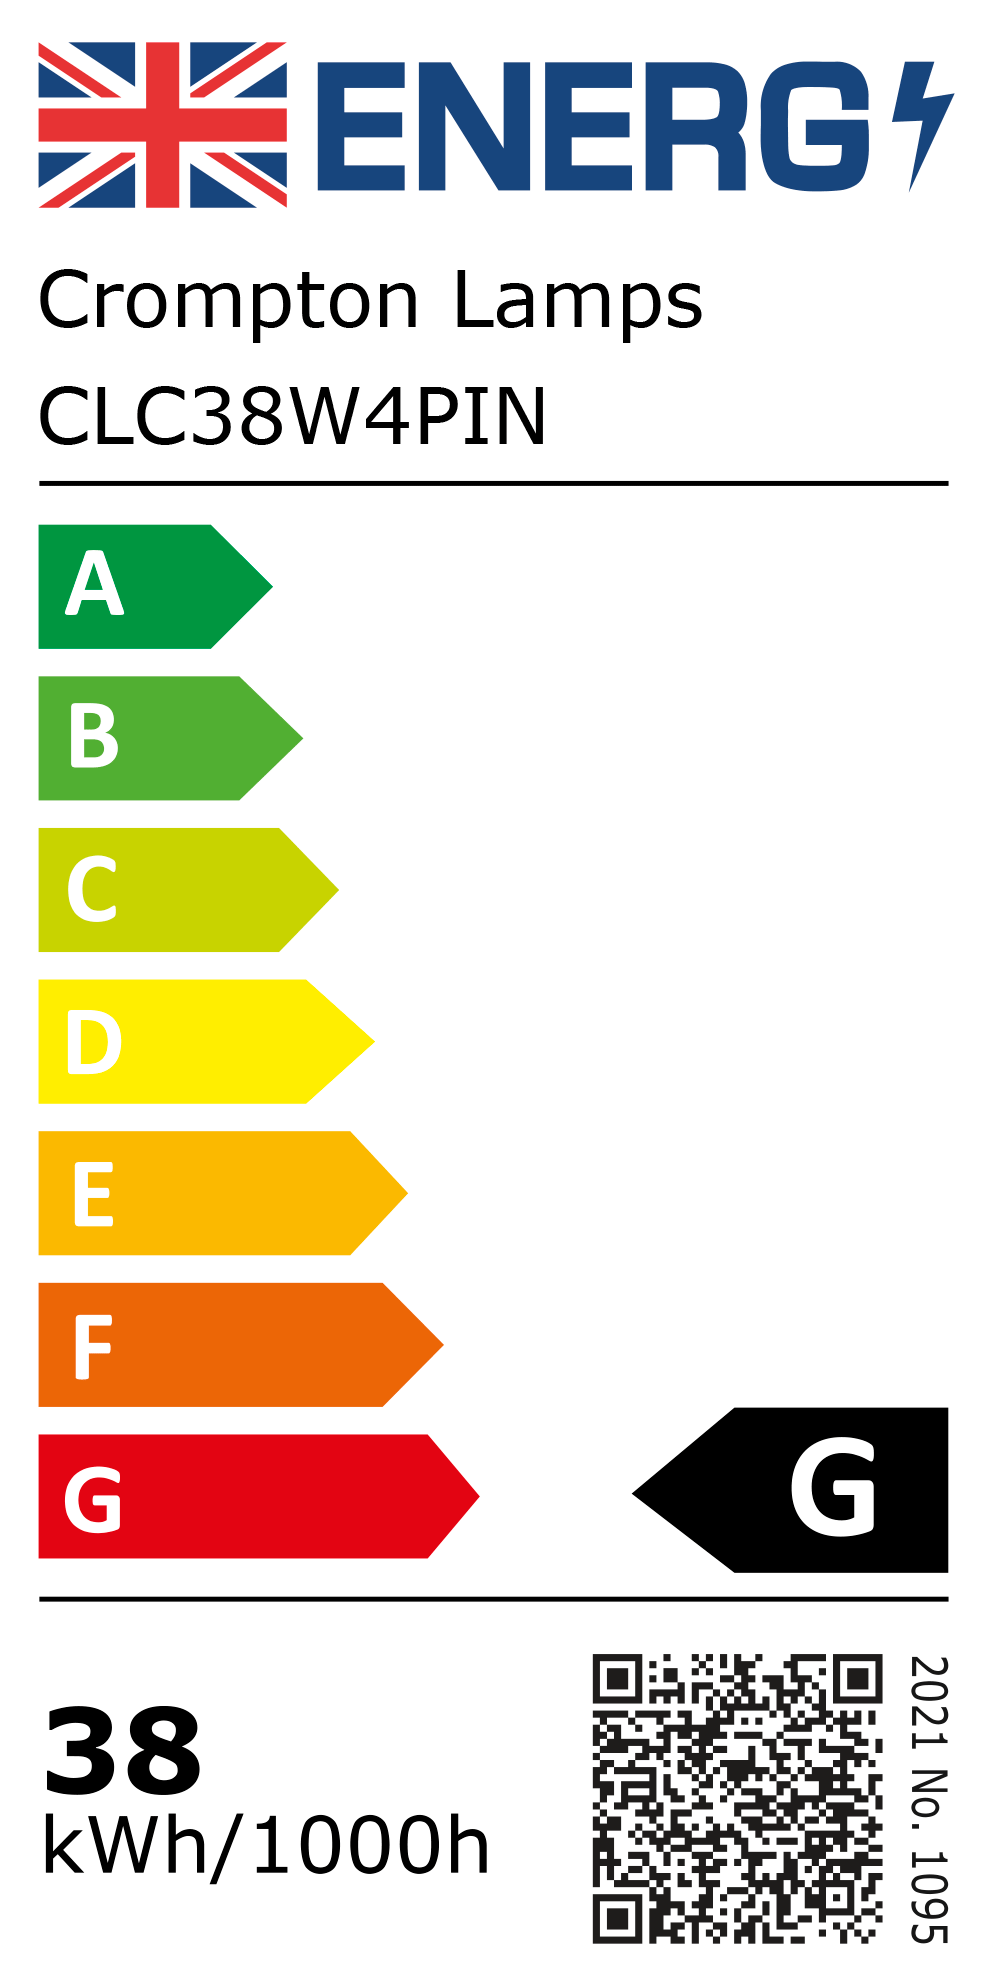 New 2021 Energy Rating Label: Stock Code CLC38W4PIN